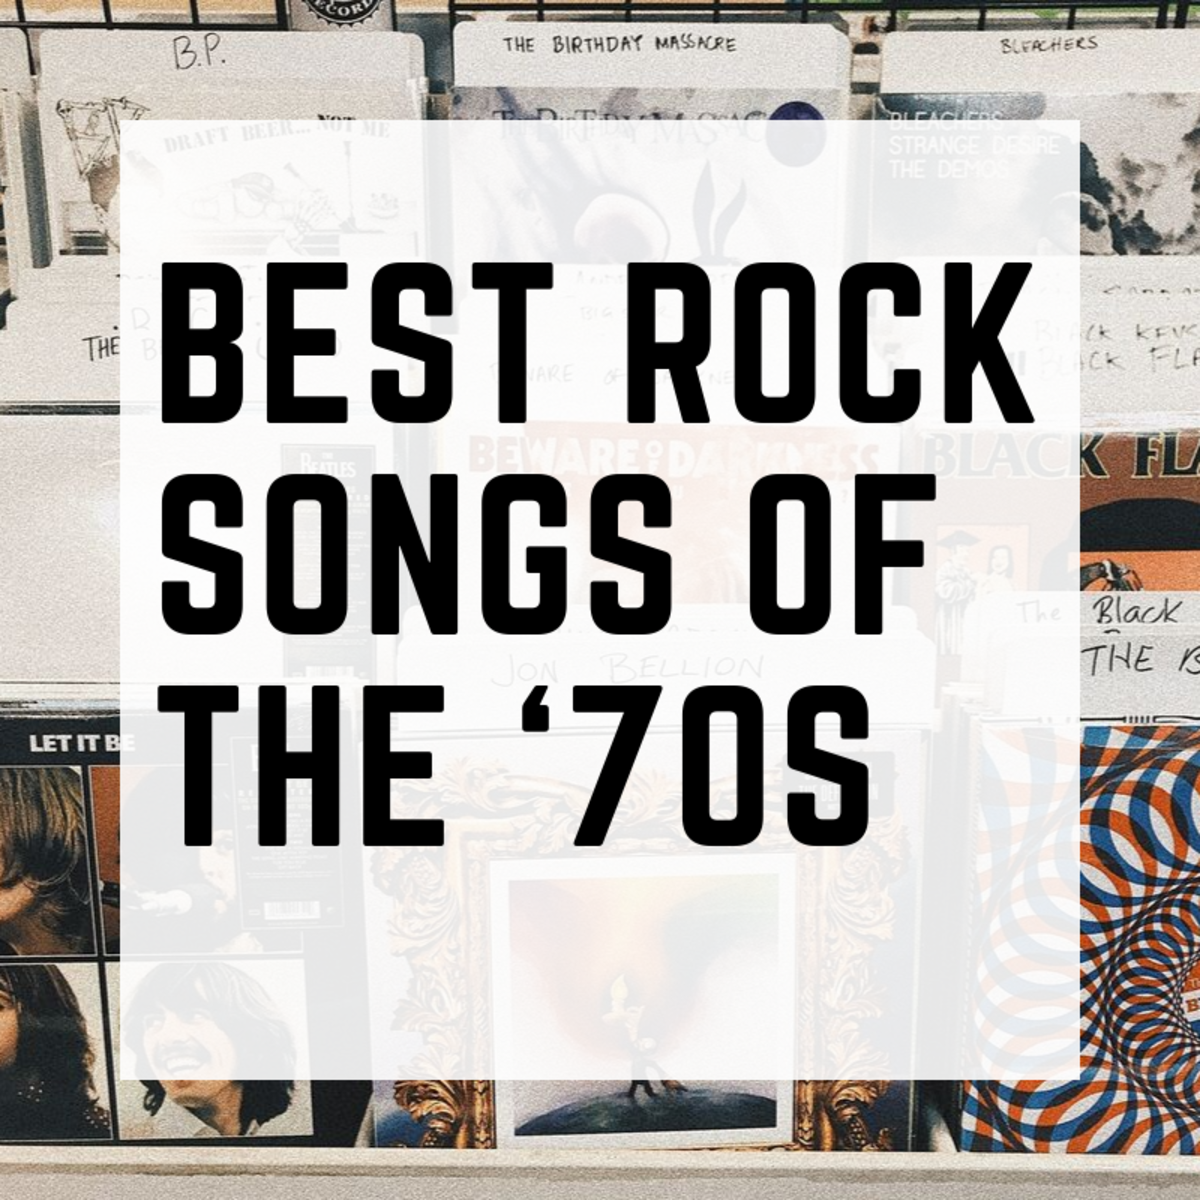 100 Best Rock Songs of the ‘70s